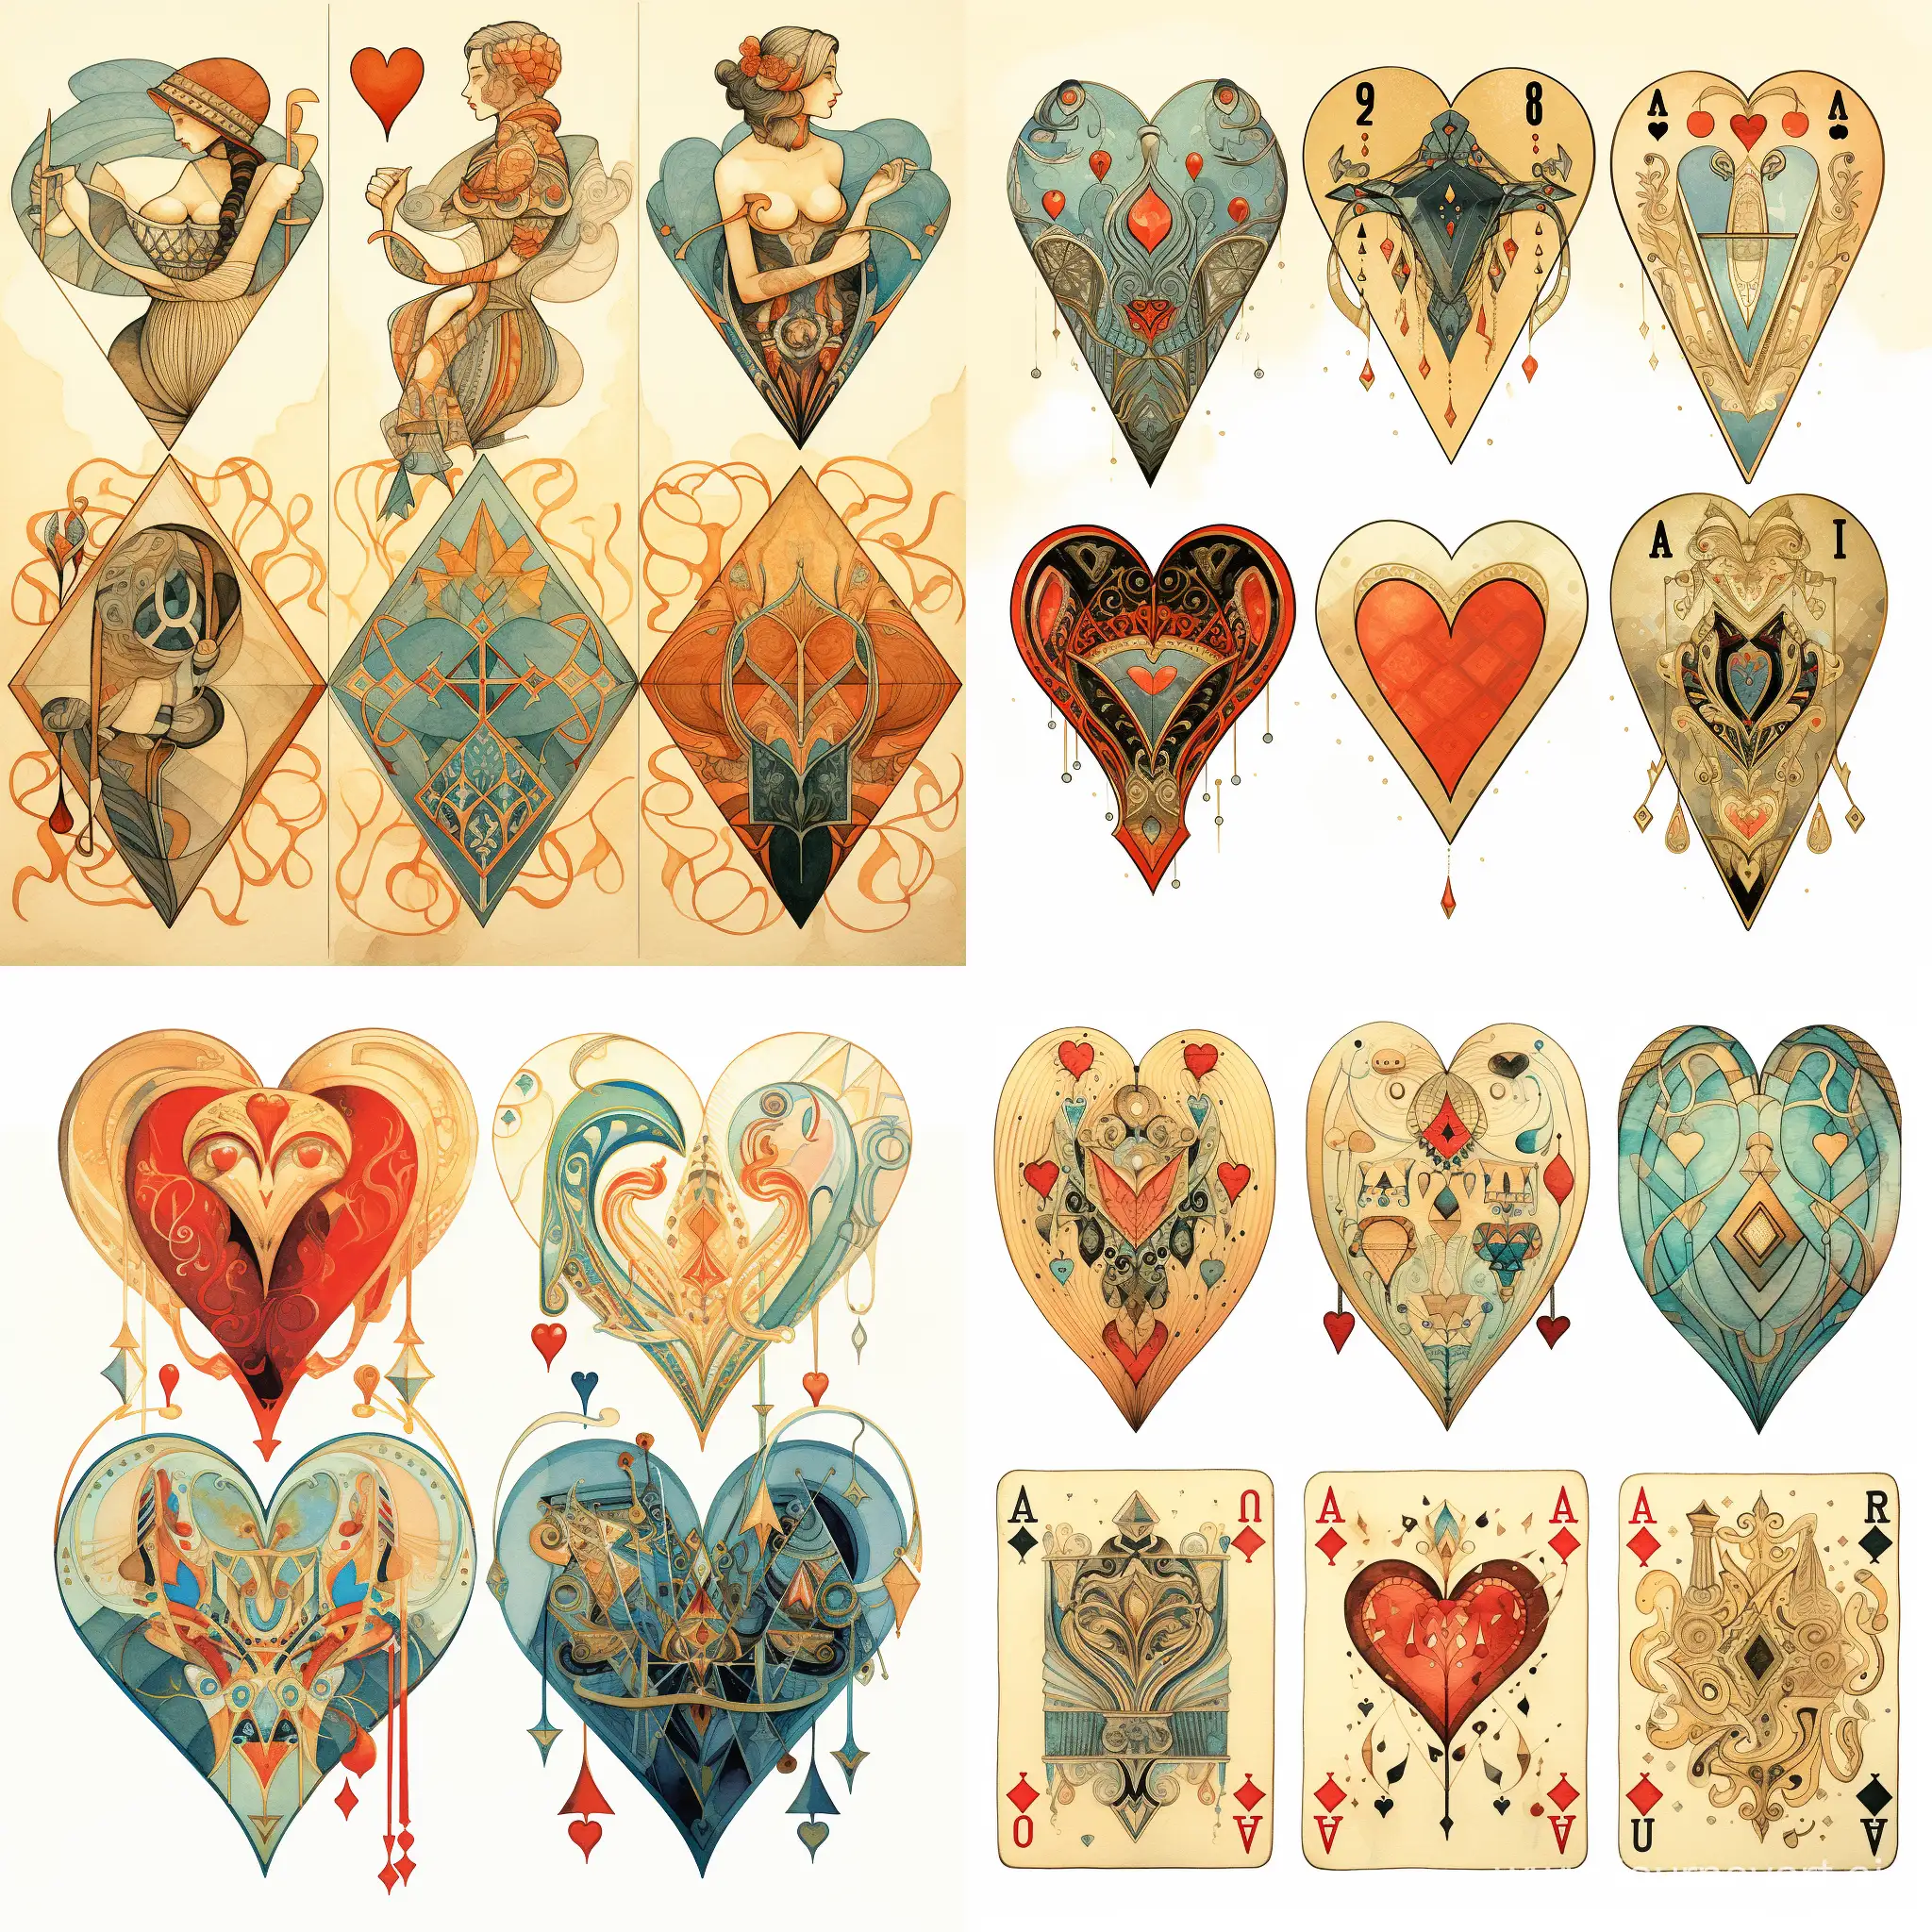 Four variations: hearts, diamonds, clubs, spades, Ancient Egypt, illustration, stylized caricature, Victo Ngai, watercolor, decorative, flat drawing